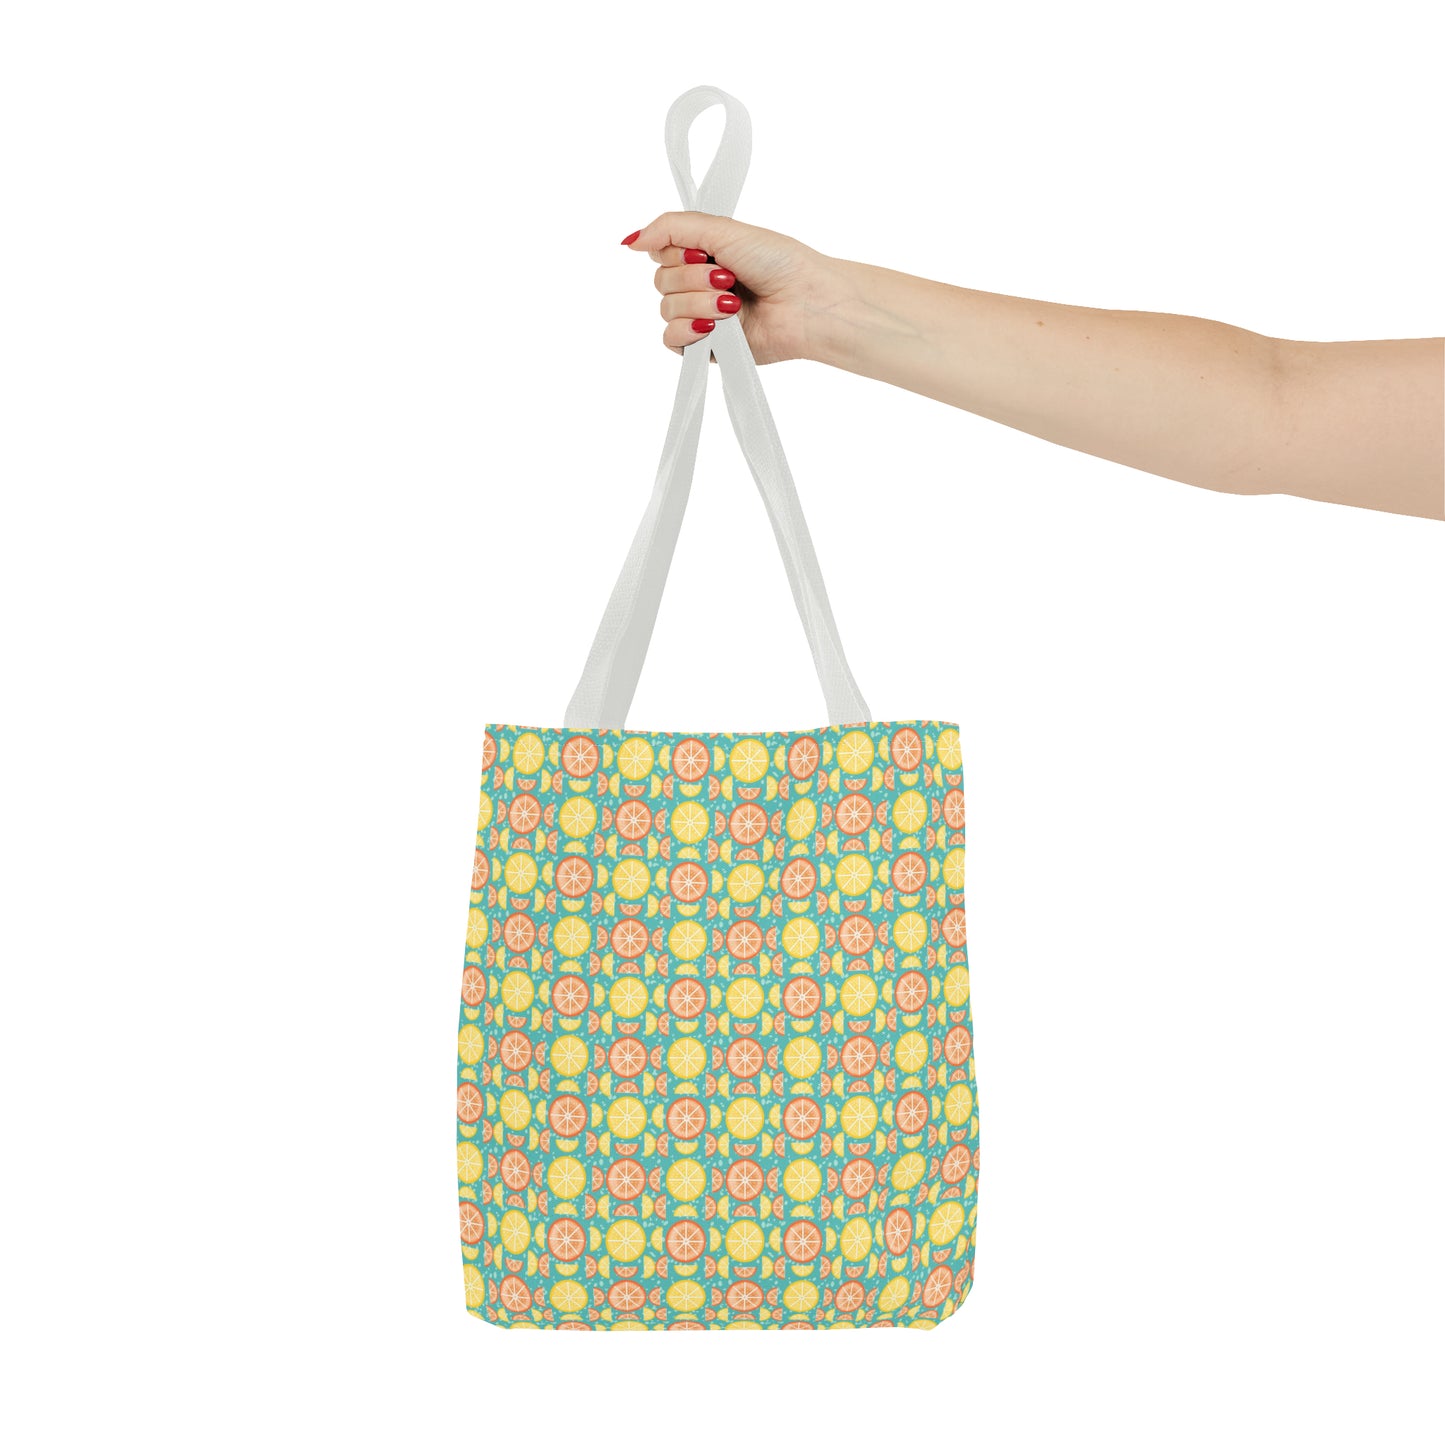 Citrus Slices Geometric Tote Bag - Carry Your Essentials in Style